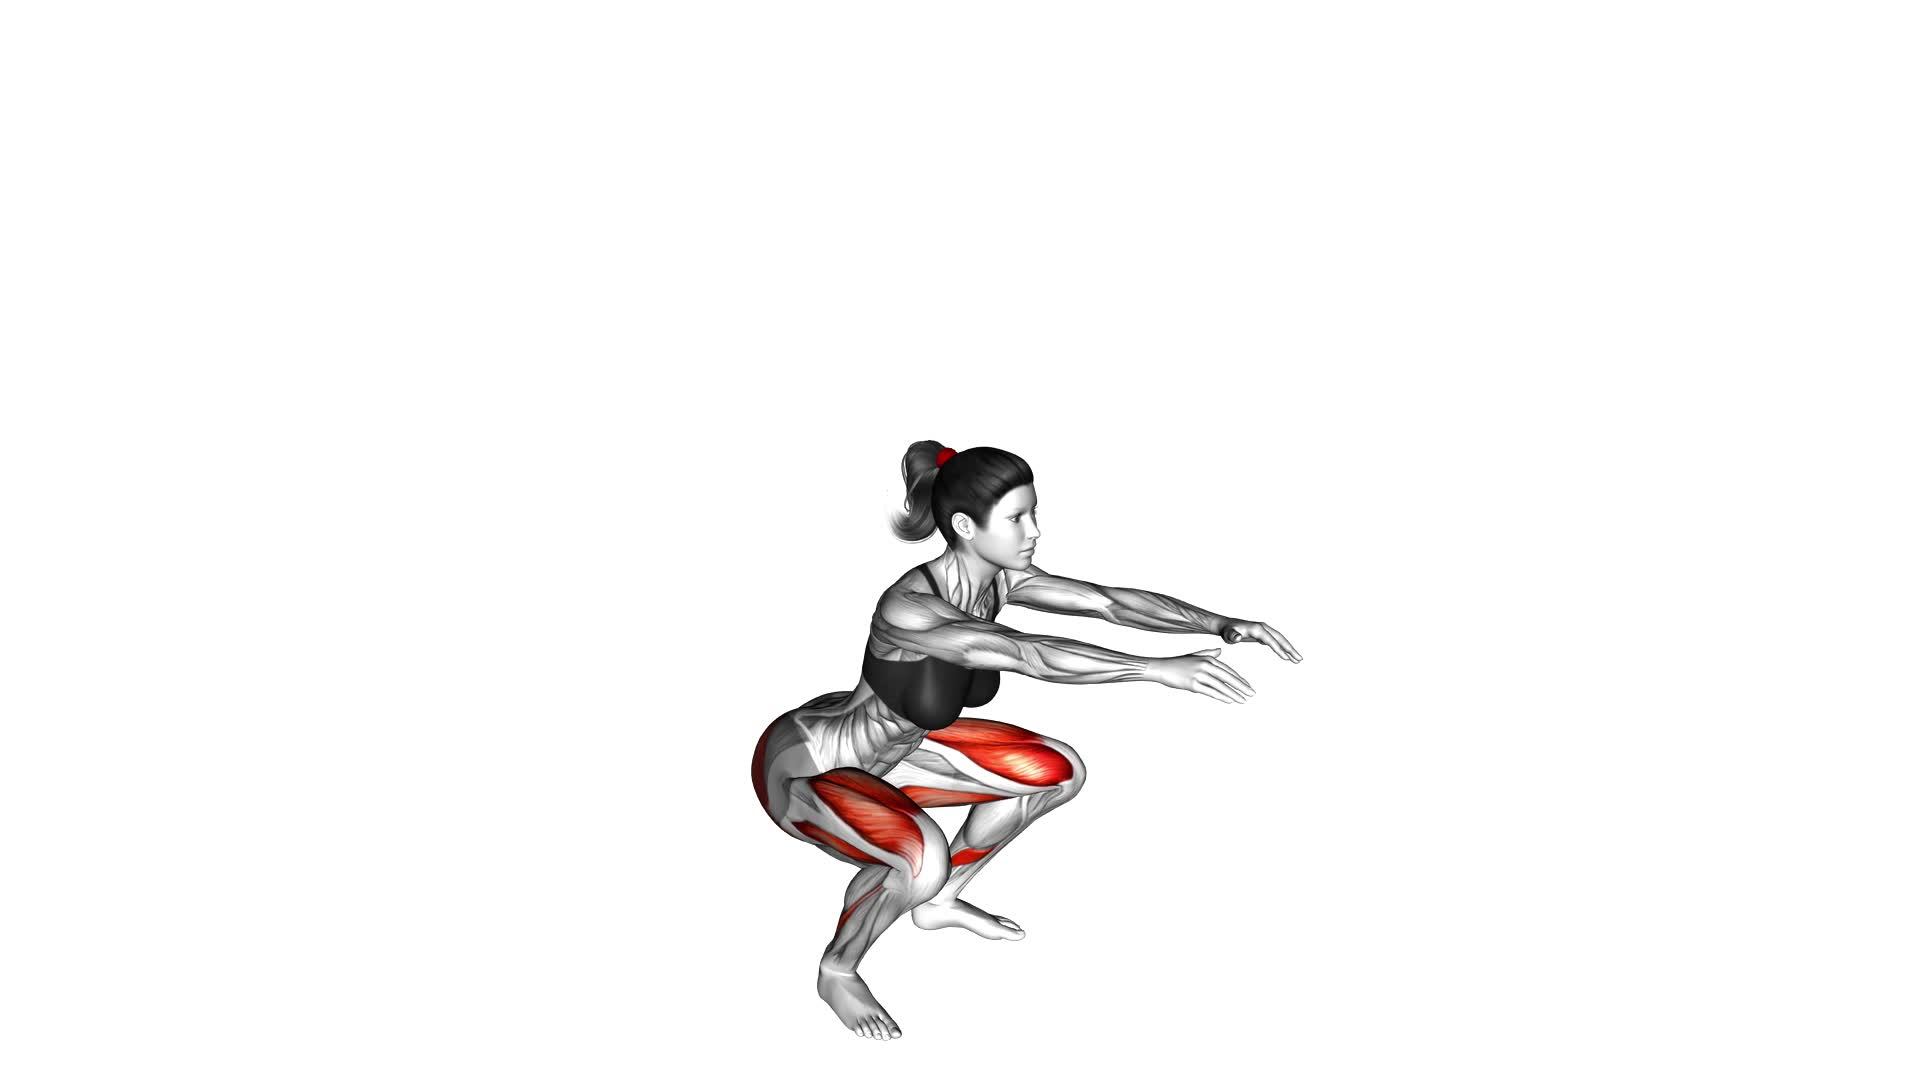 Squat (female) - Video Exercise Guide & Tips